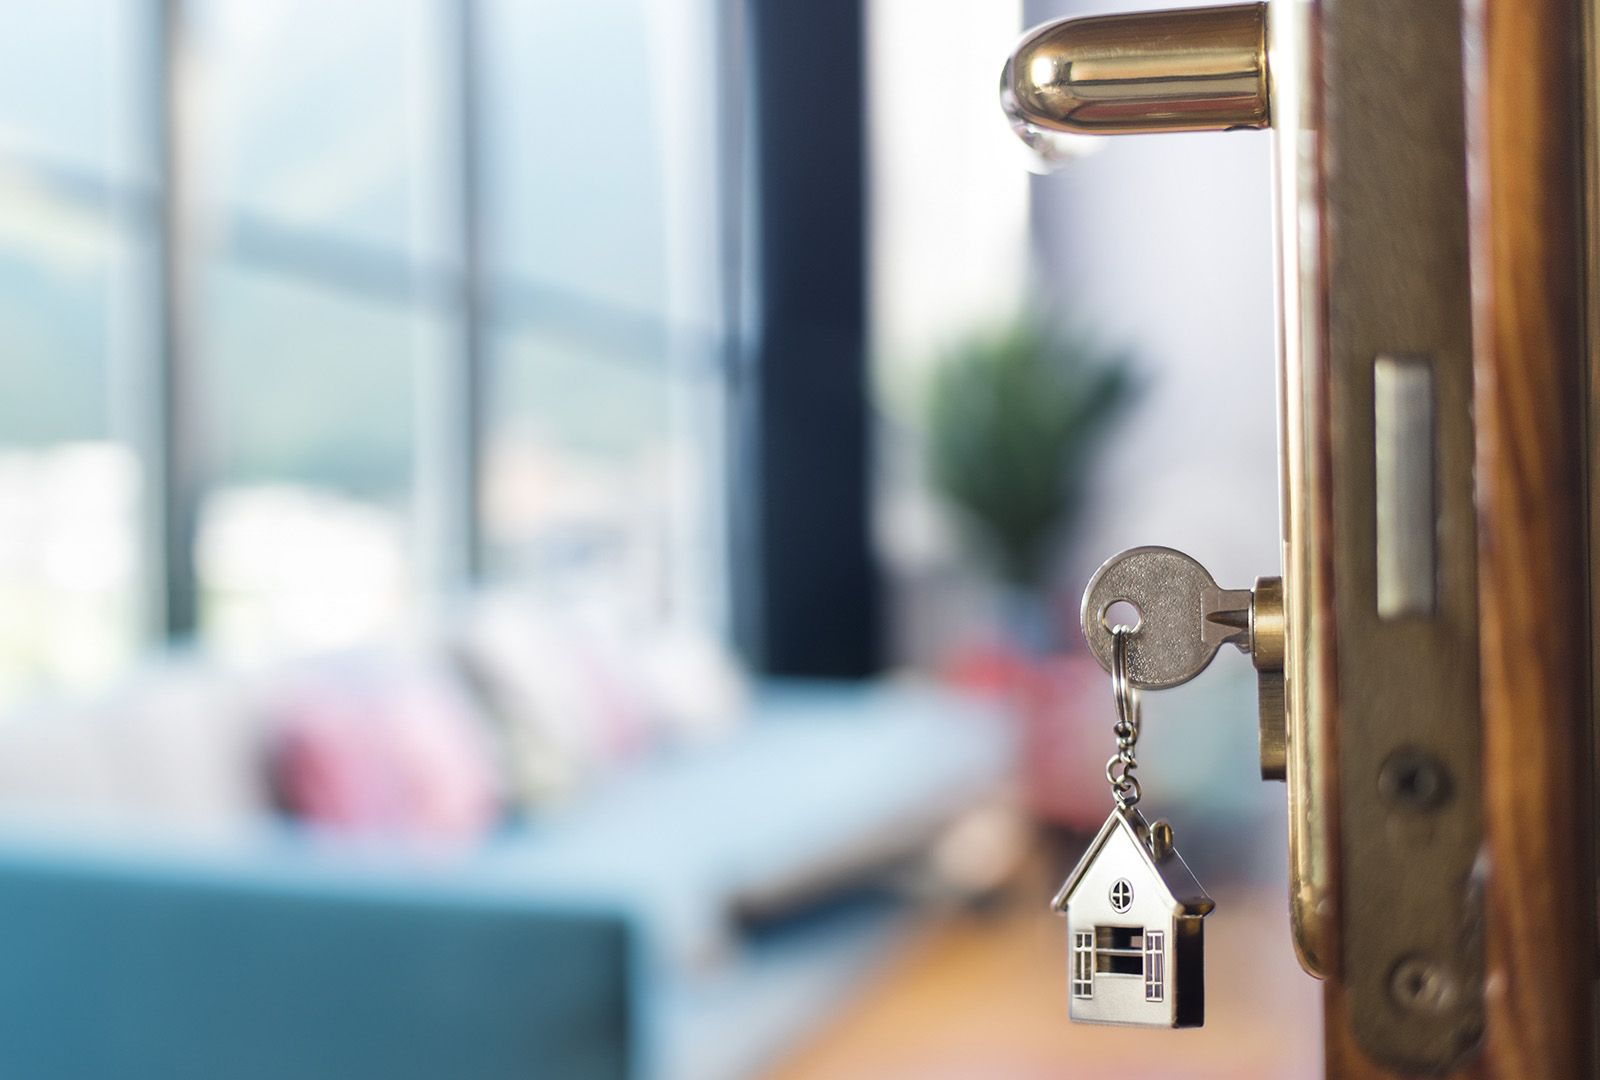 House-shaped keychain dangling from the lock of a door opened into a home